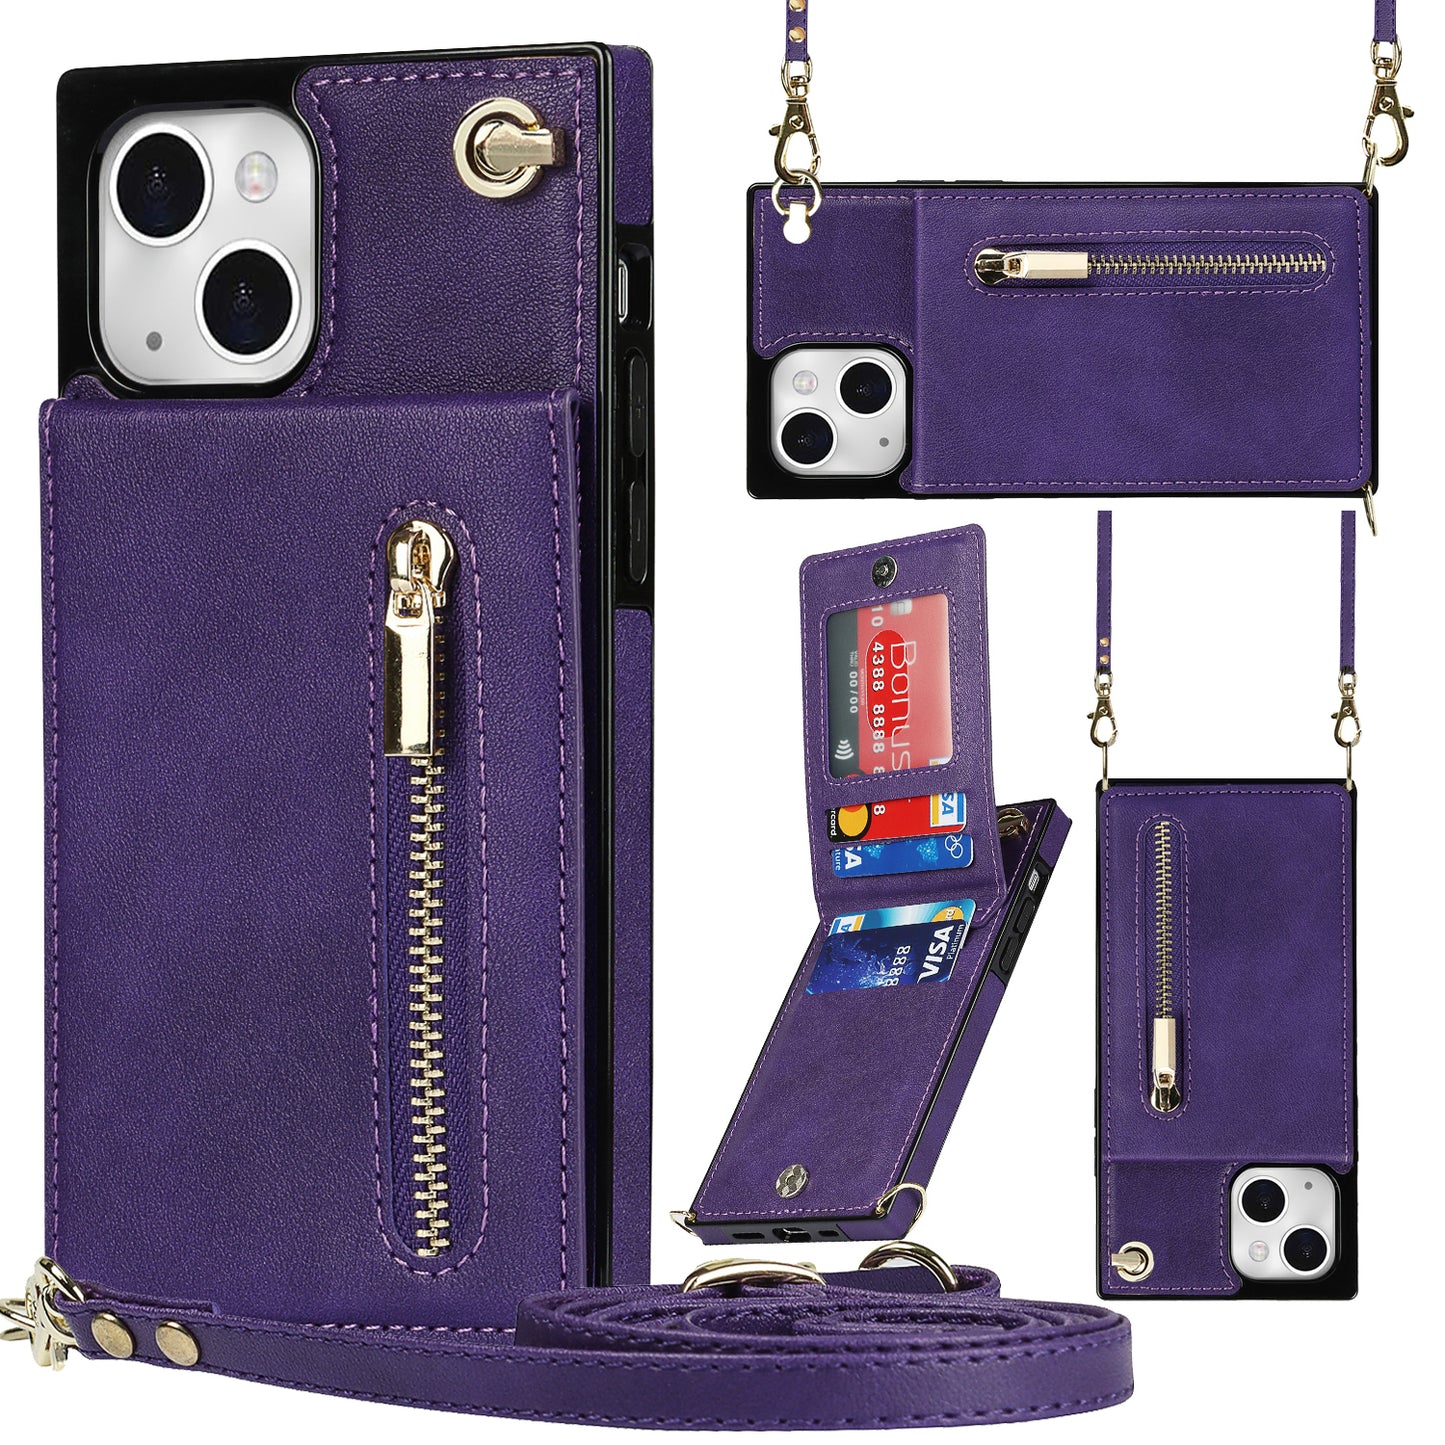 Apple iPhone 13 Leather Cover with Classical Card Cash Slots Zipper Hand Shoulder Strap Kickstand